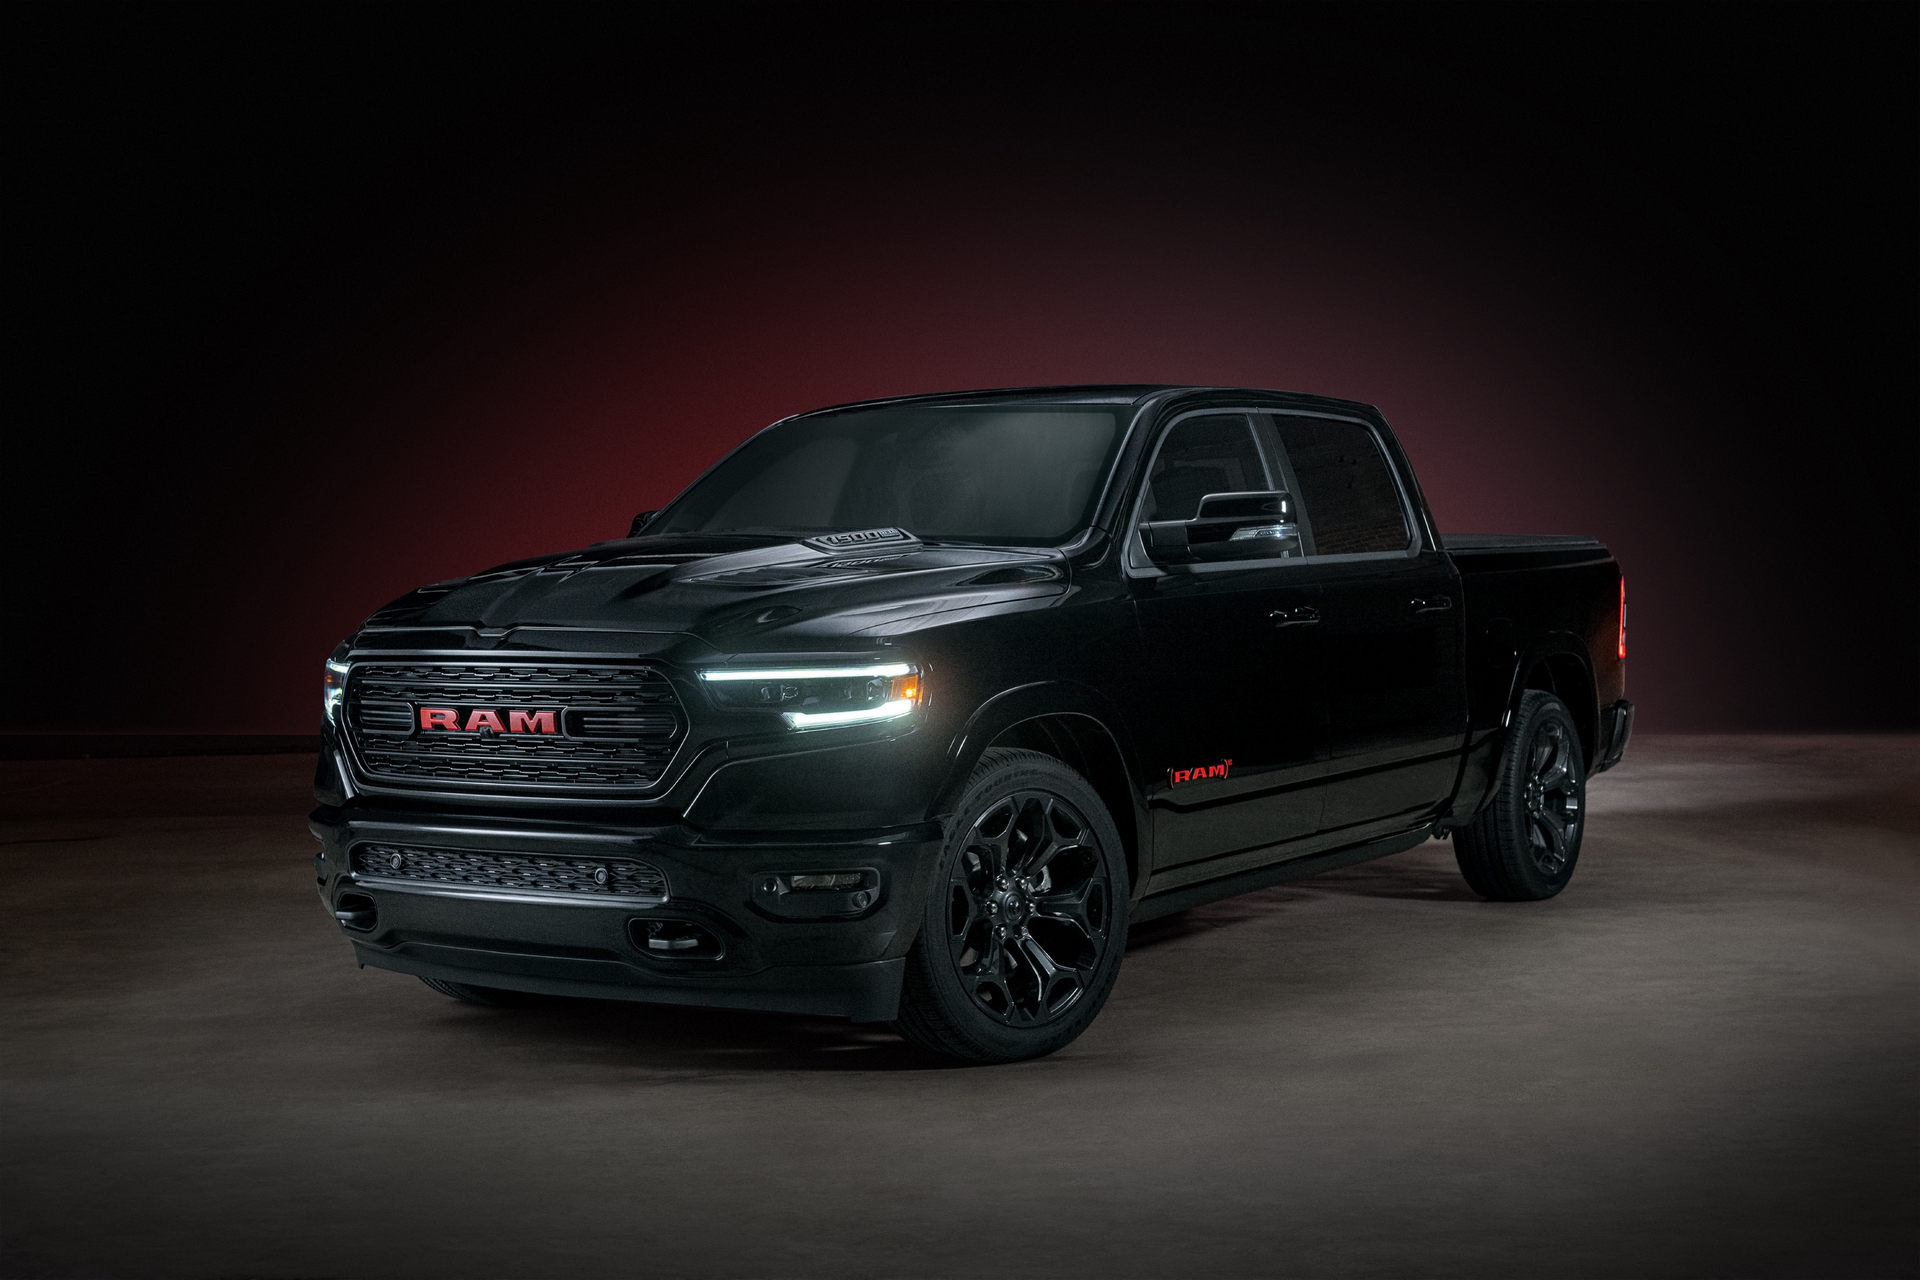 Ram 1500 Ram Red Edition Will Pull Santa S Sleigh At Macy S Thanksgiving Day Parade Carscoops